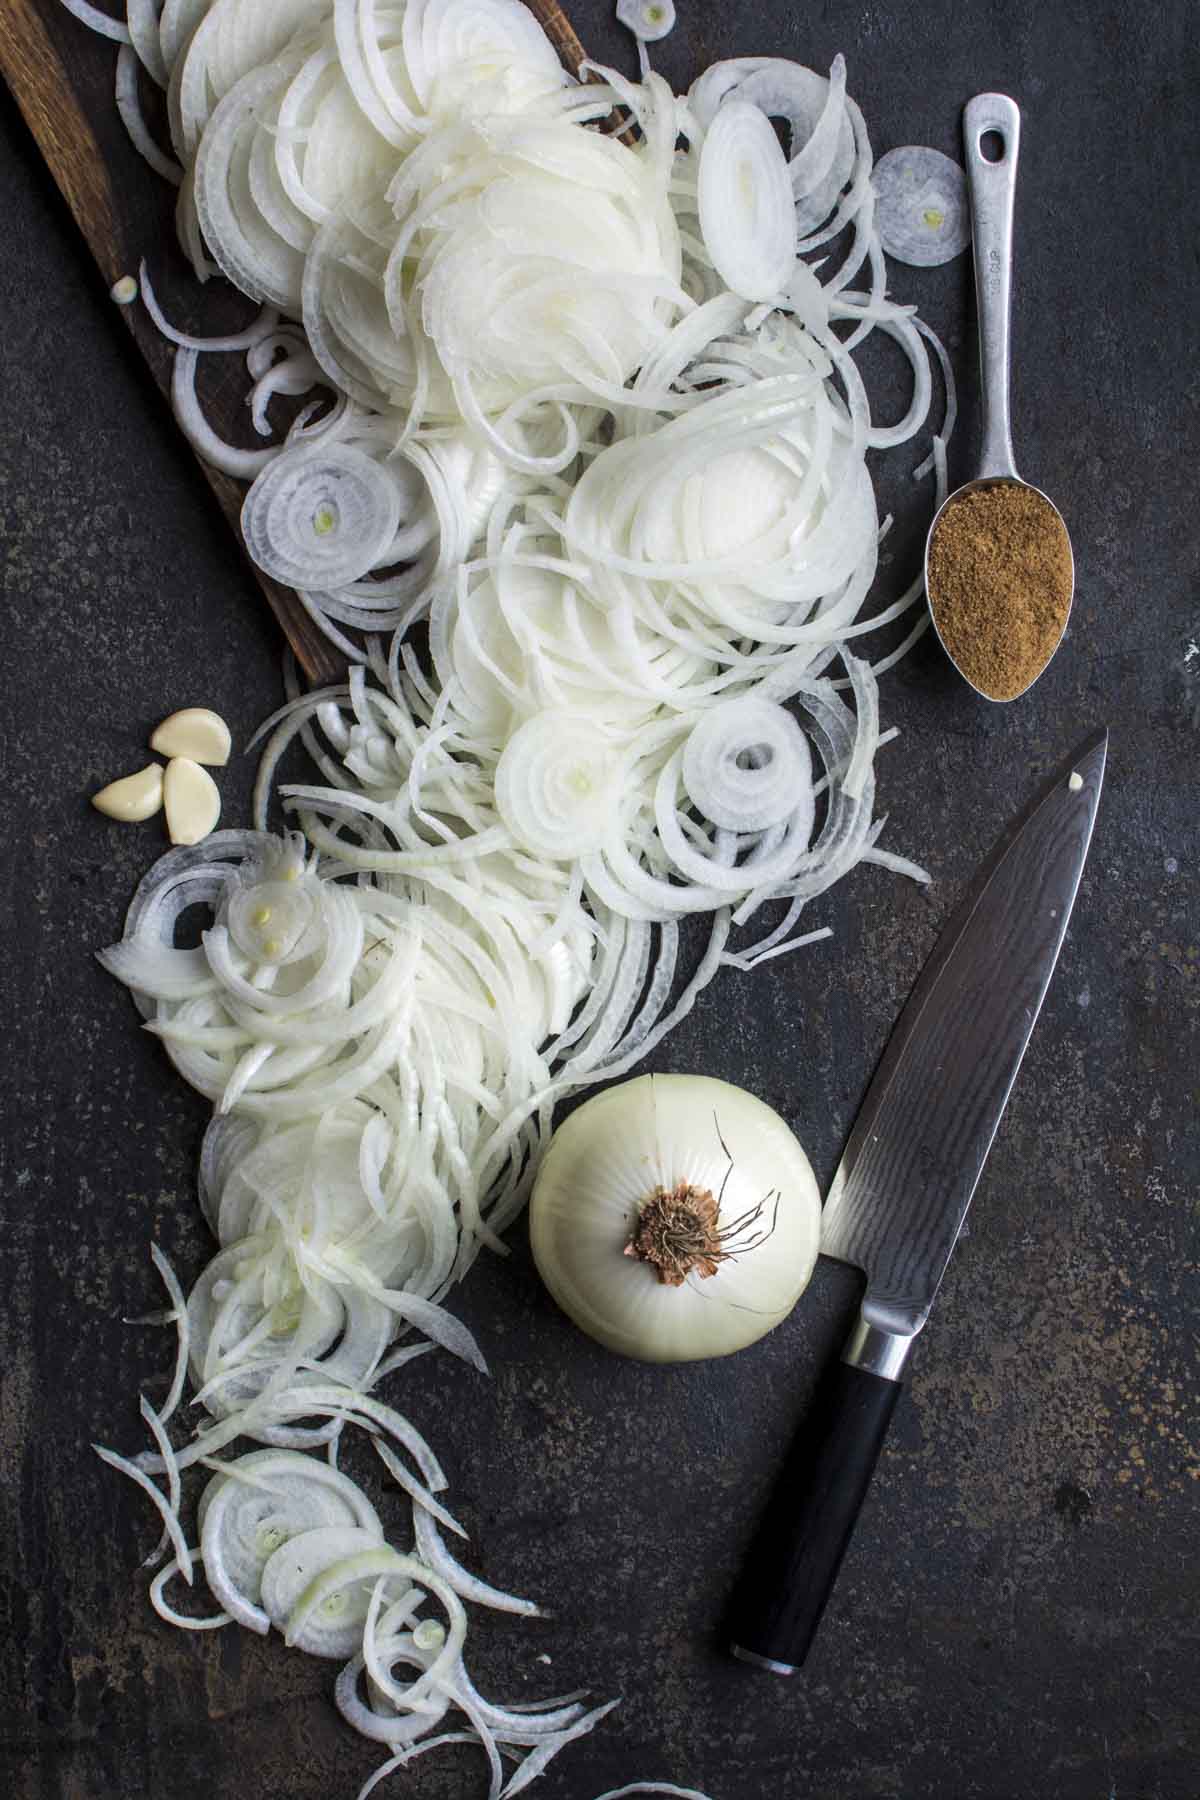 Sliced onions on a board with garlic, knife, and coconut sugar on the side